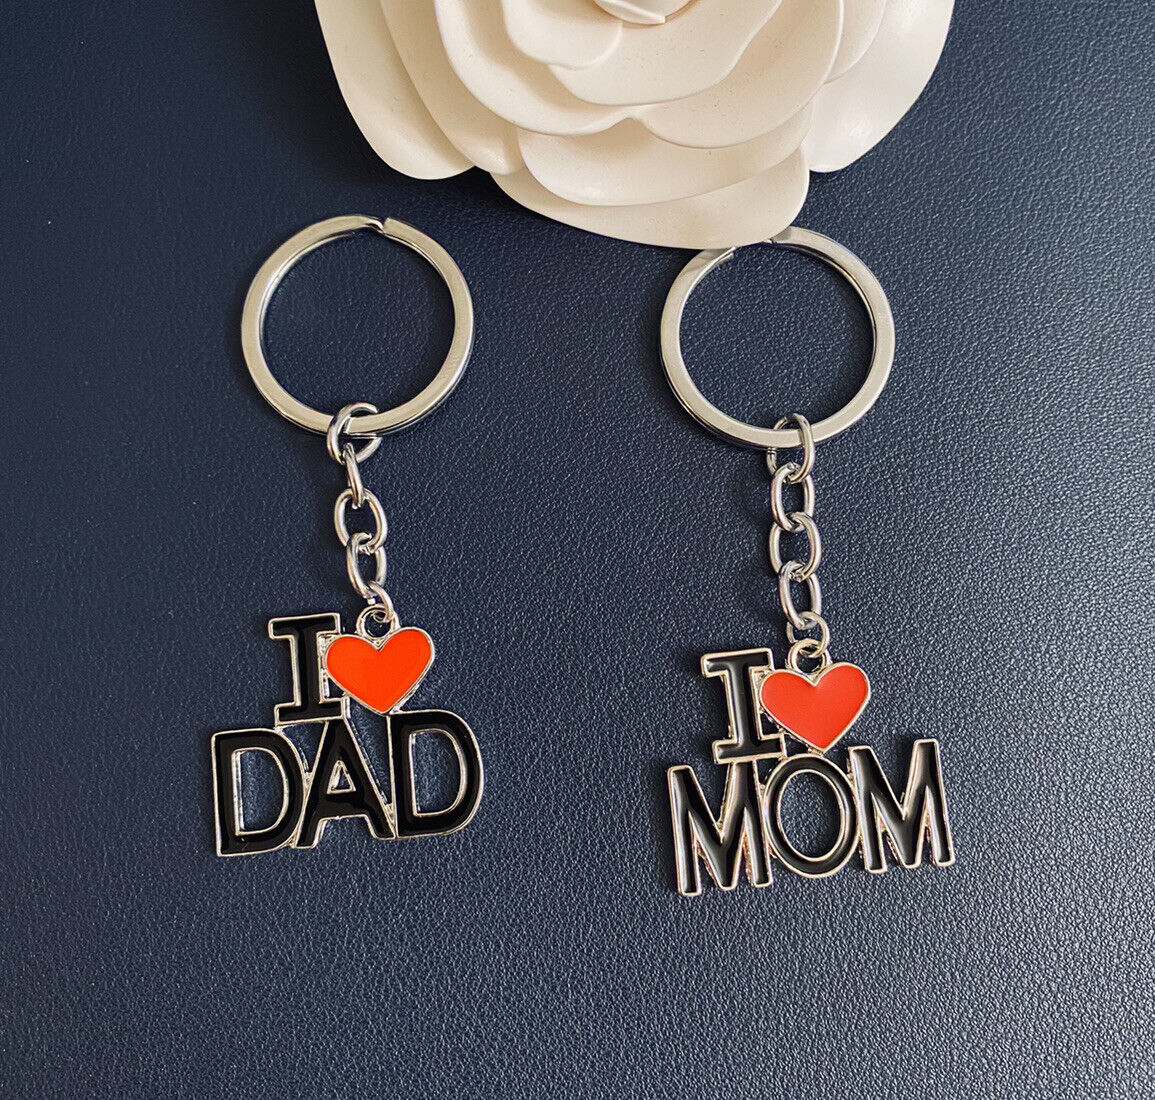 Keychain Letters I Love MOM/DAD Heart-Shaped Personality Metal, 2pc Set, New